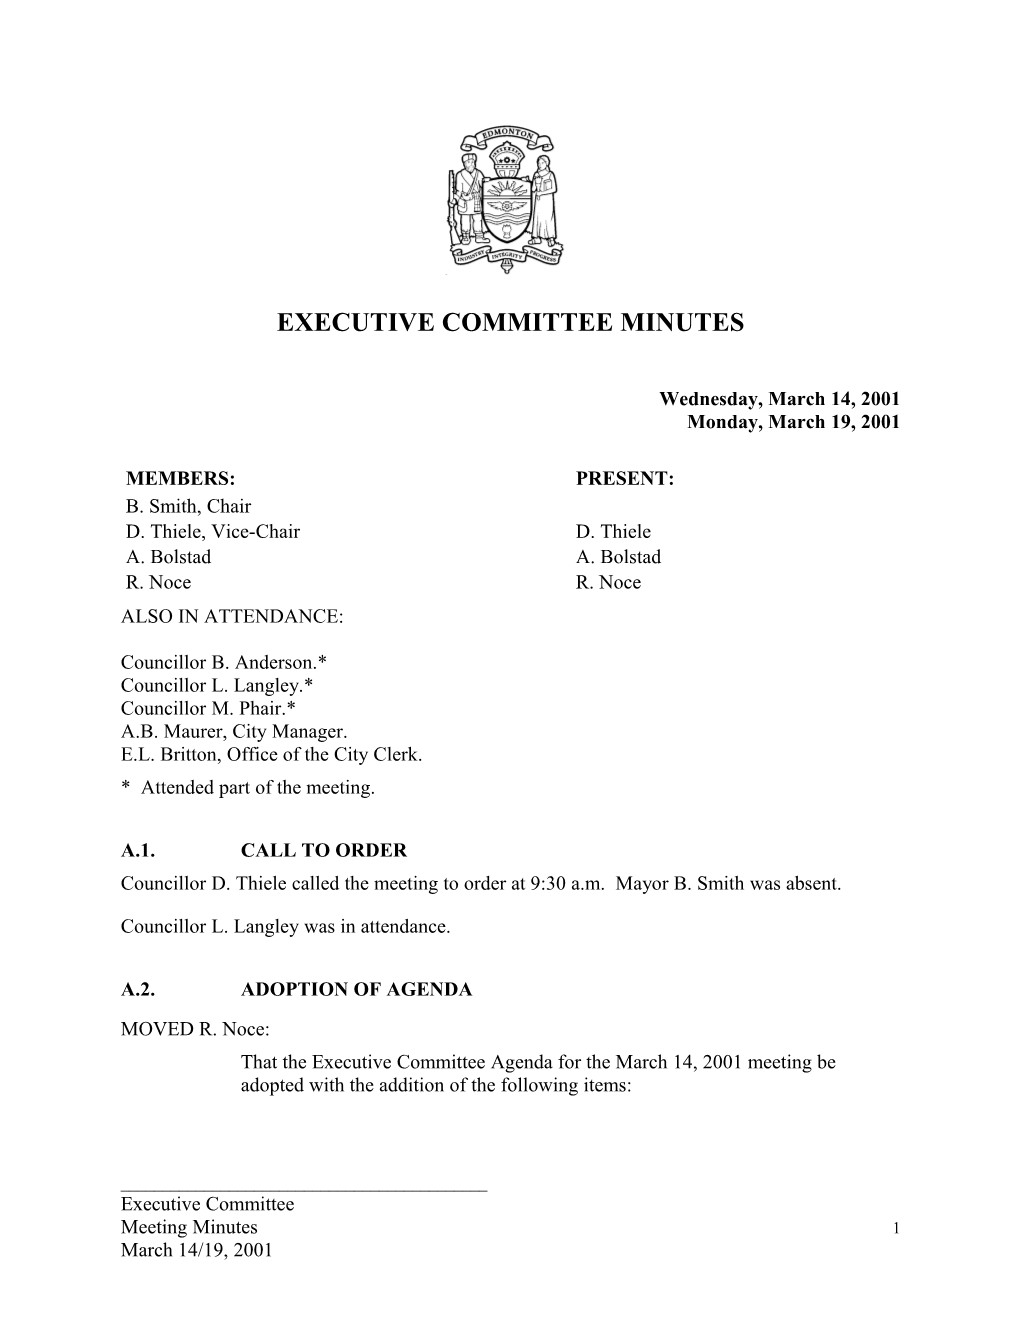 Minutes for Executive Committee March 14, 2001 Meeting